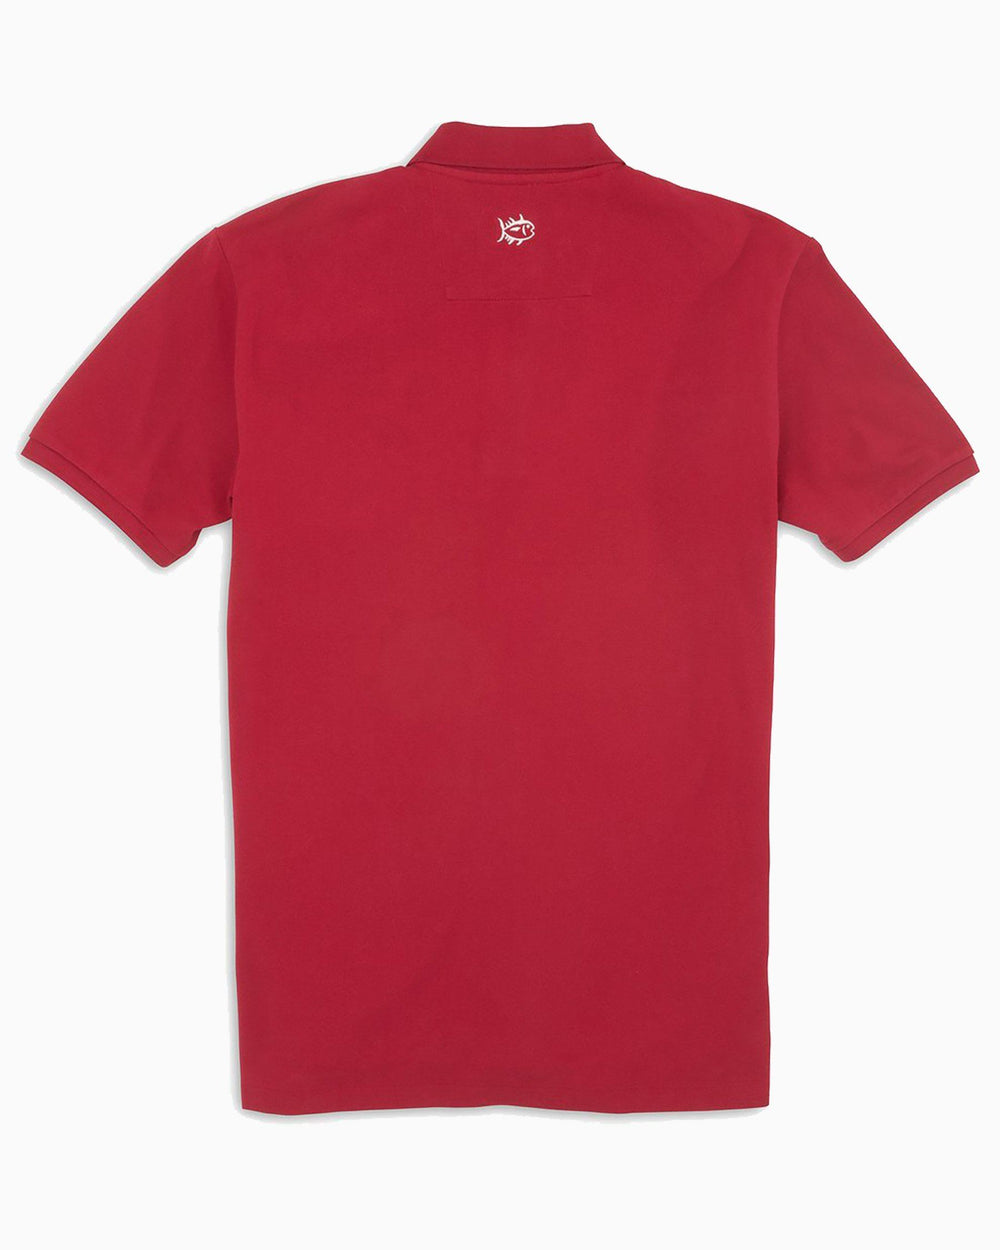 The back view of the Men's Red Alabama Crimson Tide Pique Polo Shirt by Southern Tide - Crimson